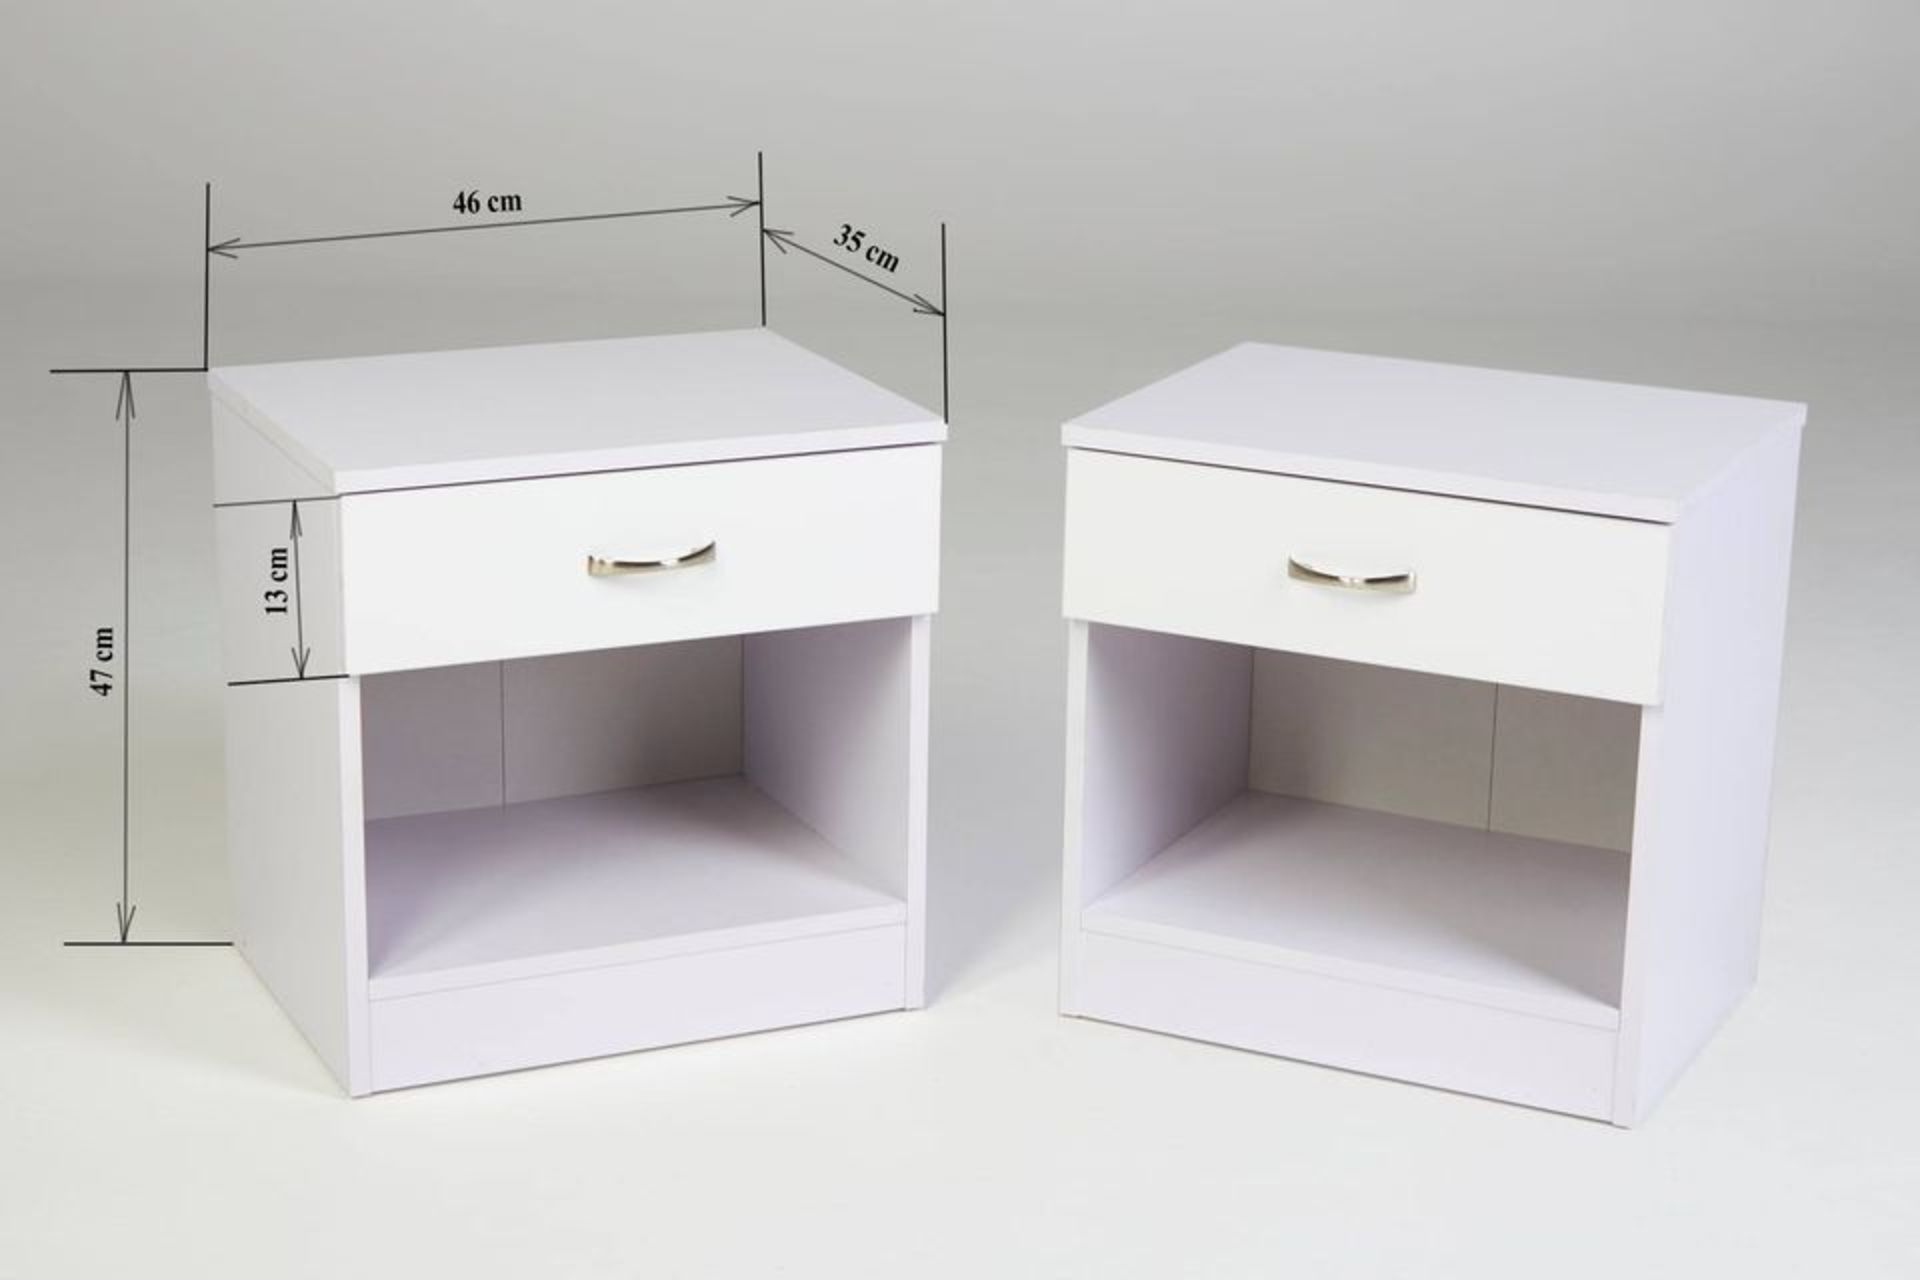 20 X WHITE SINGLE DRAWER BEDSIDES WITH HIGH GLOSS DRAWER FRONTS